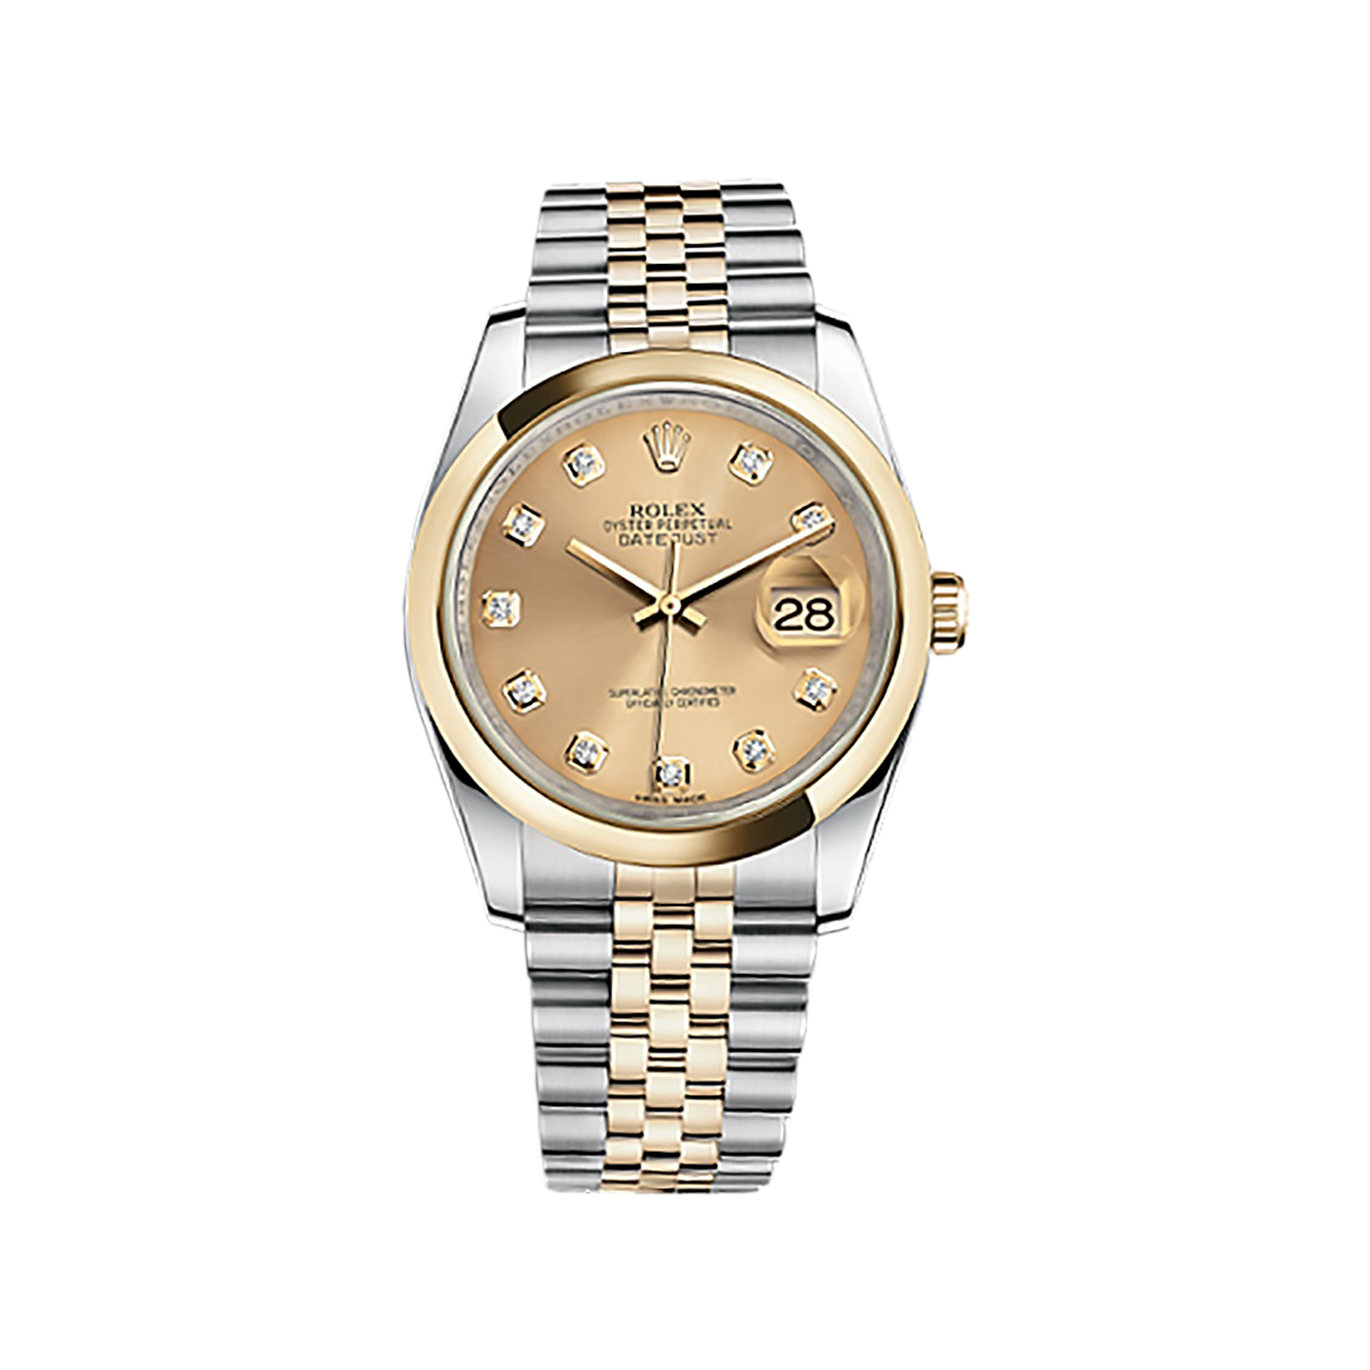 Datejust 36 116203 Gold & Stainless Steel Watch (Champagne Set with Diamonds)